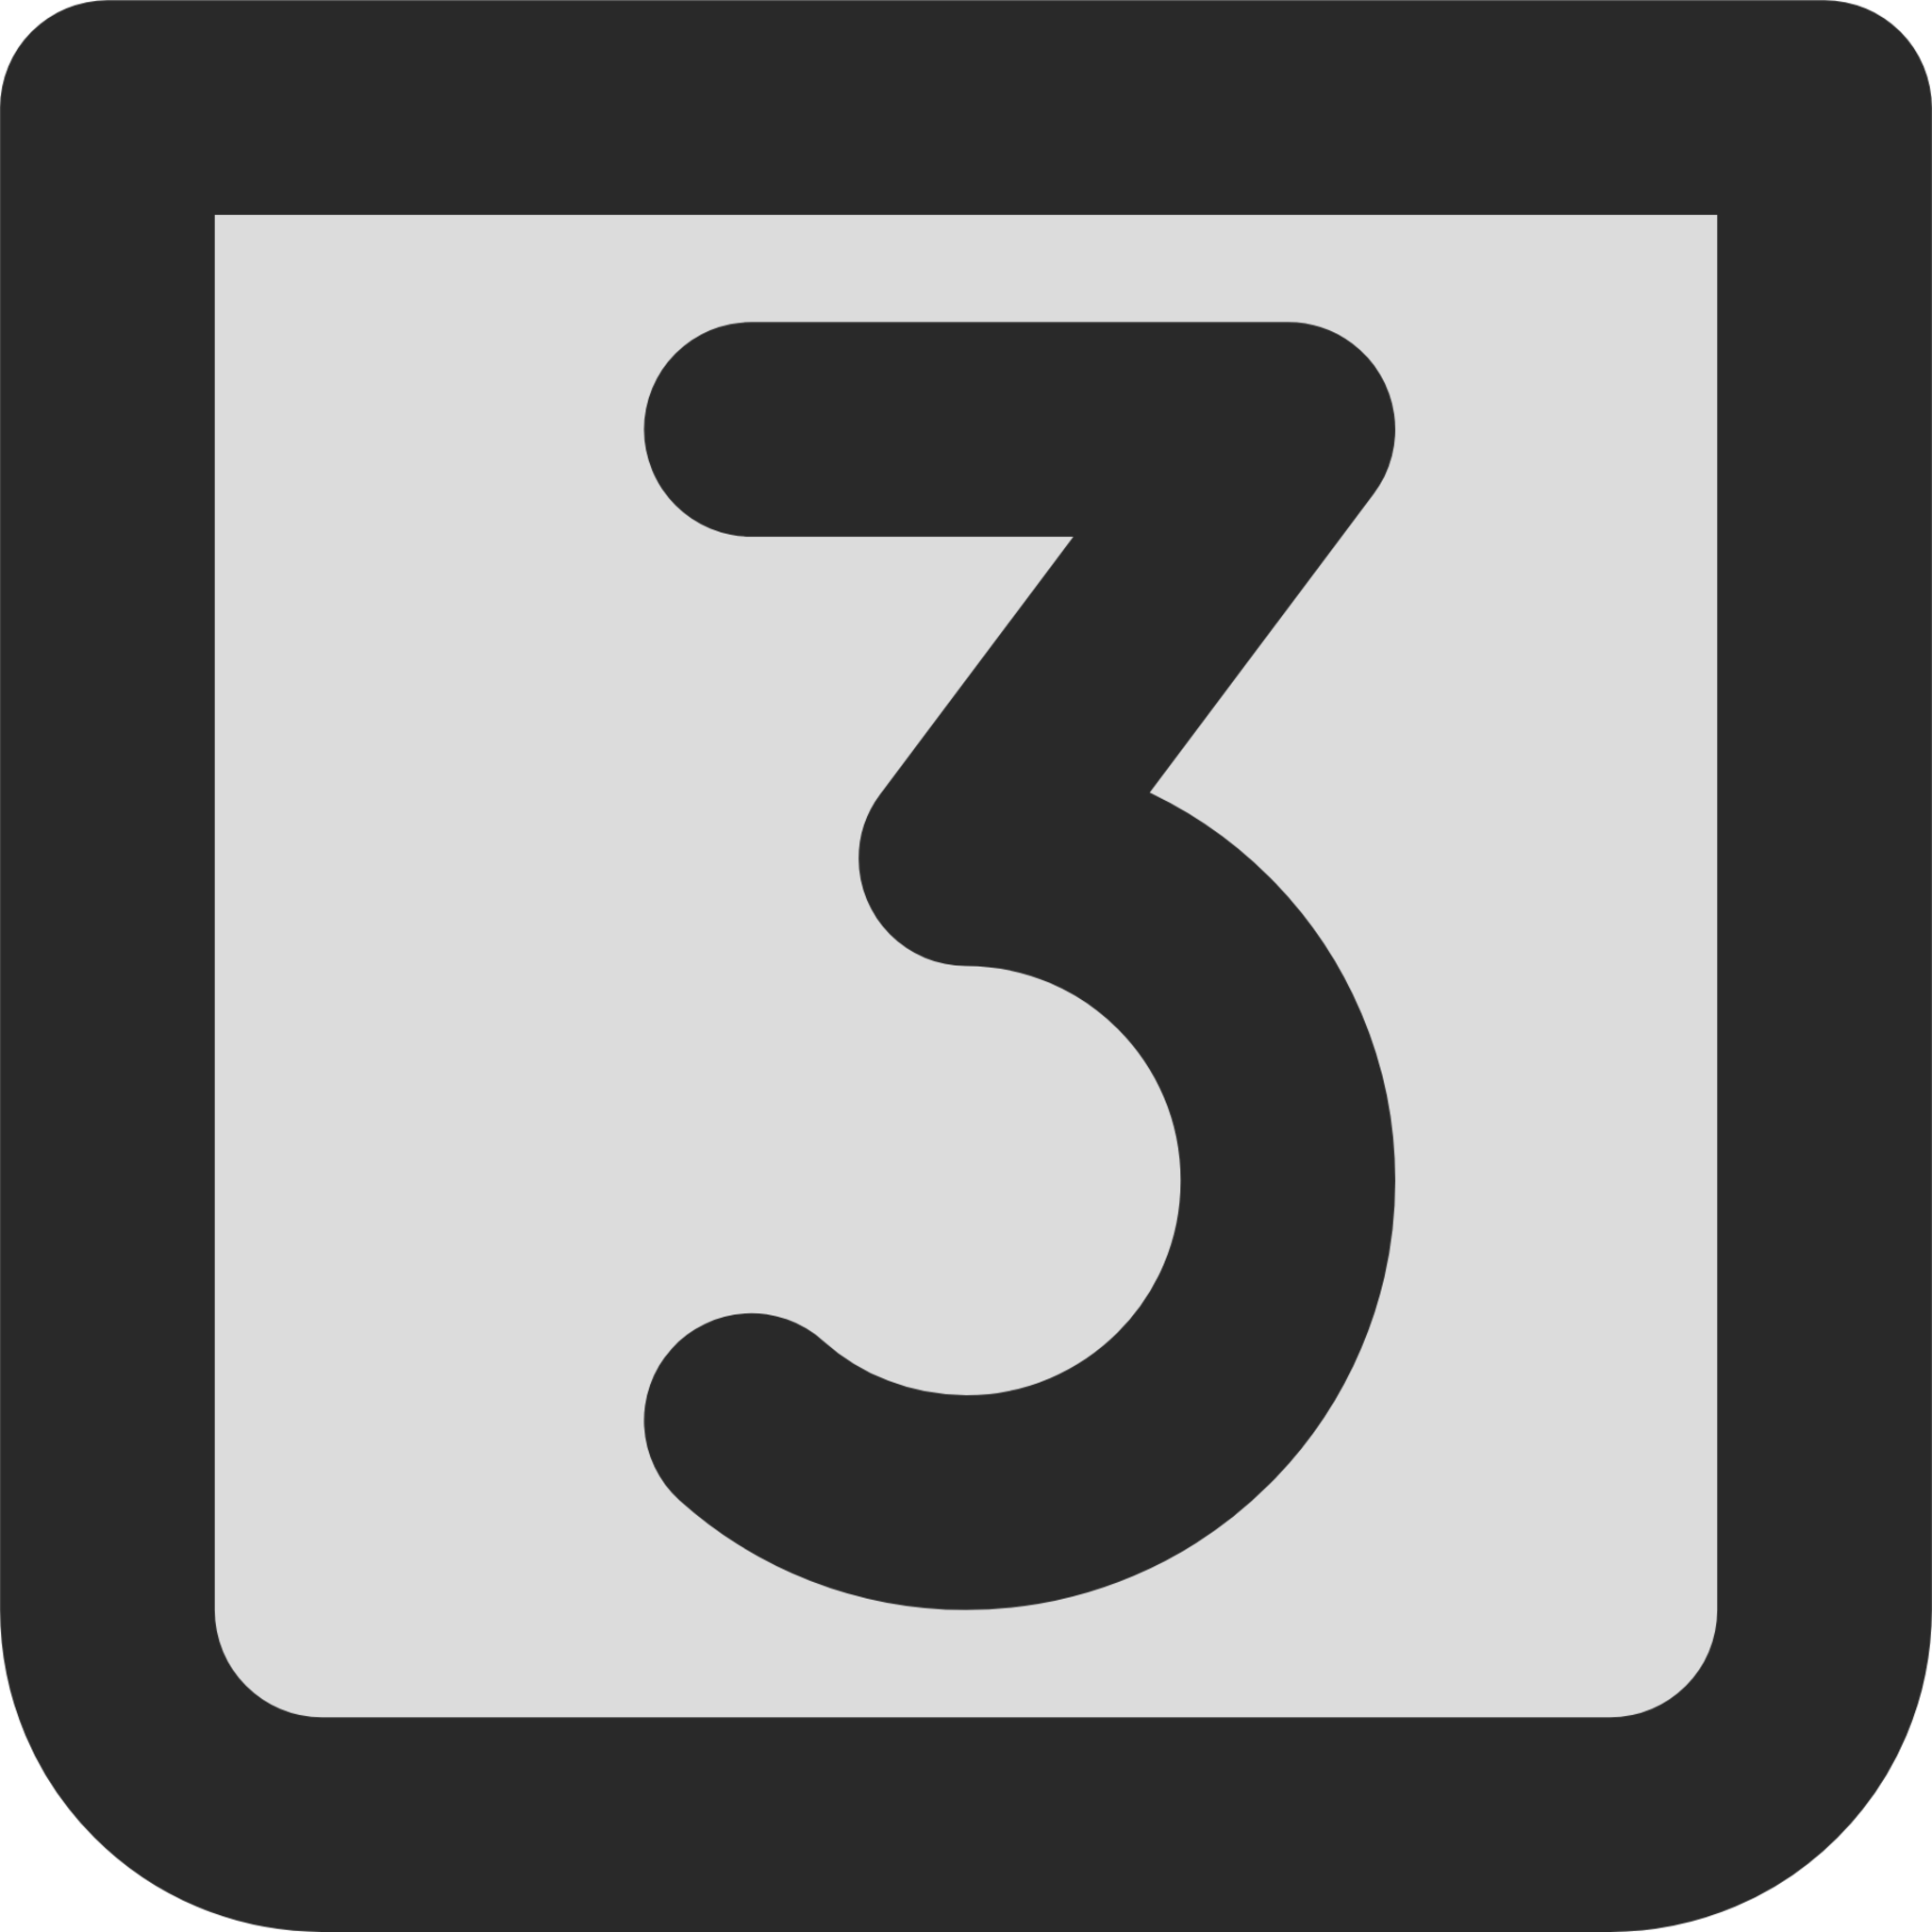 number 3 square icon